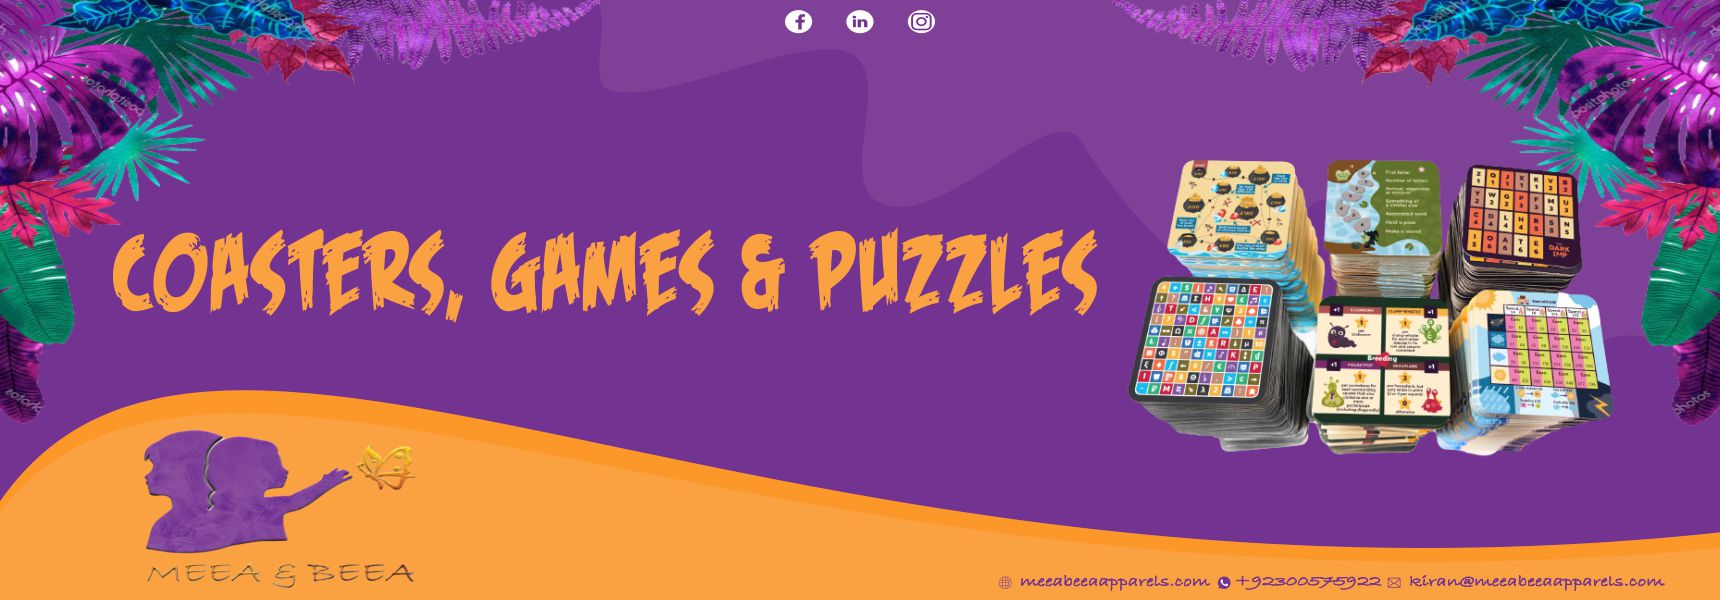 Coasters, Games & Puzzles